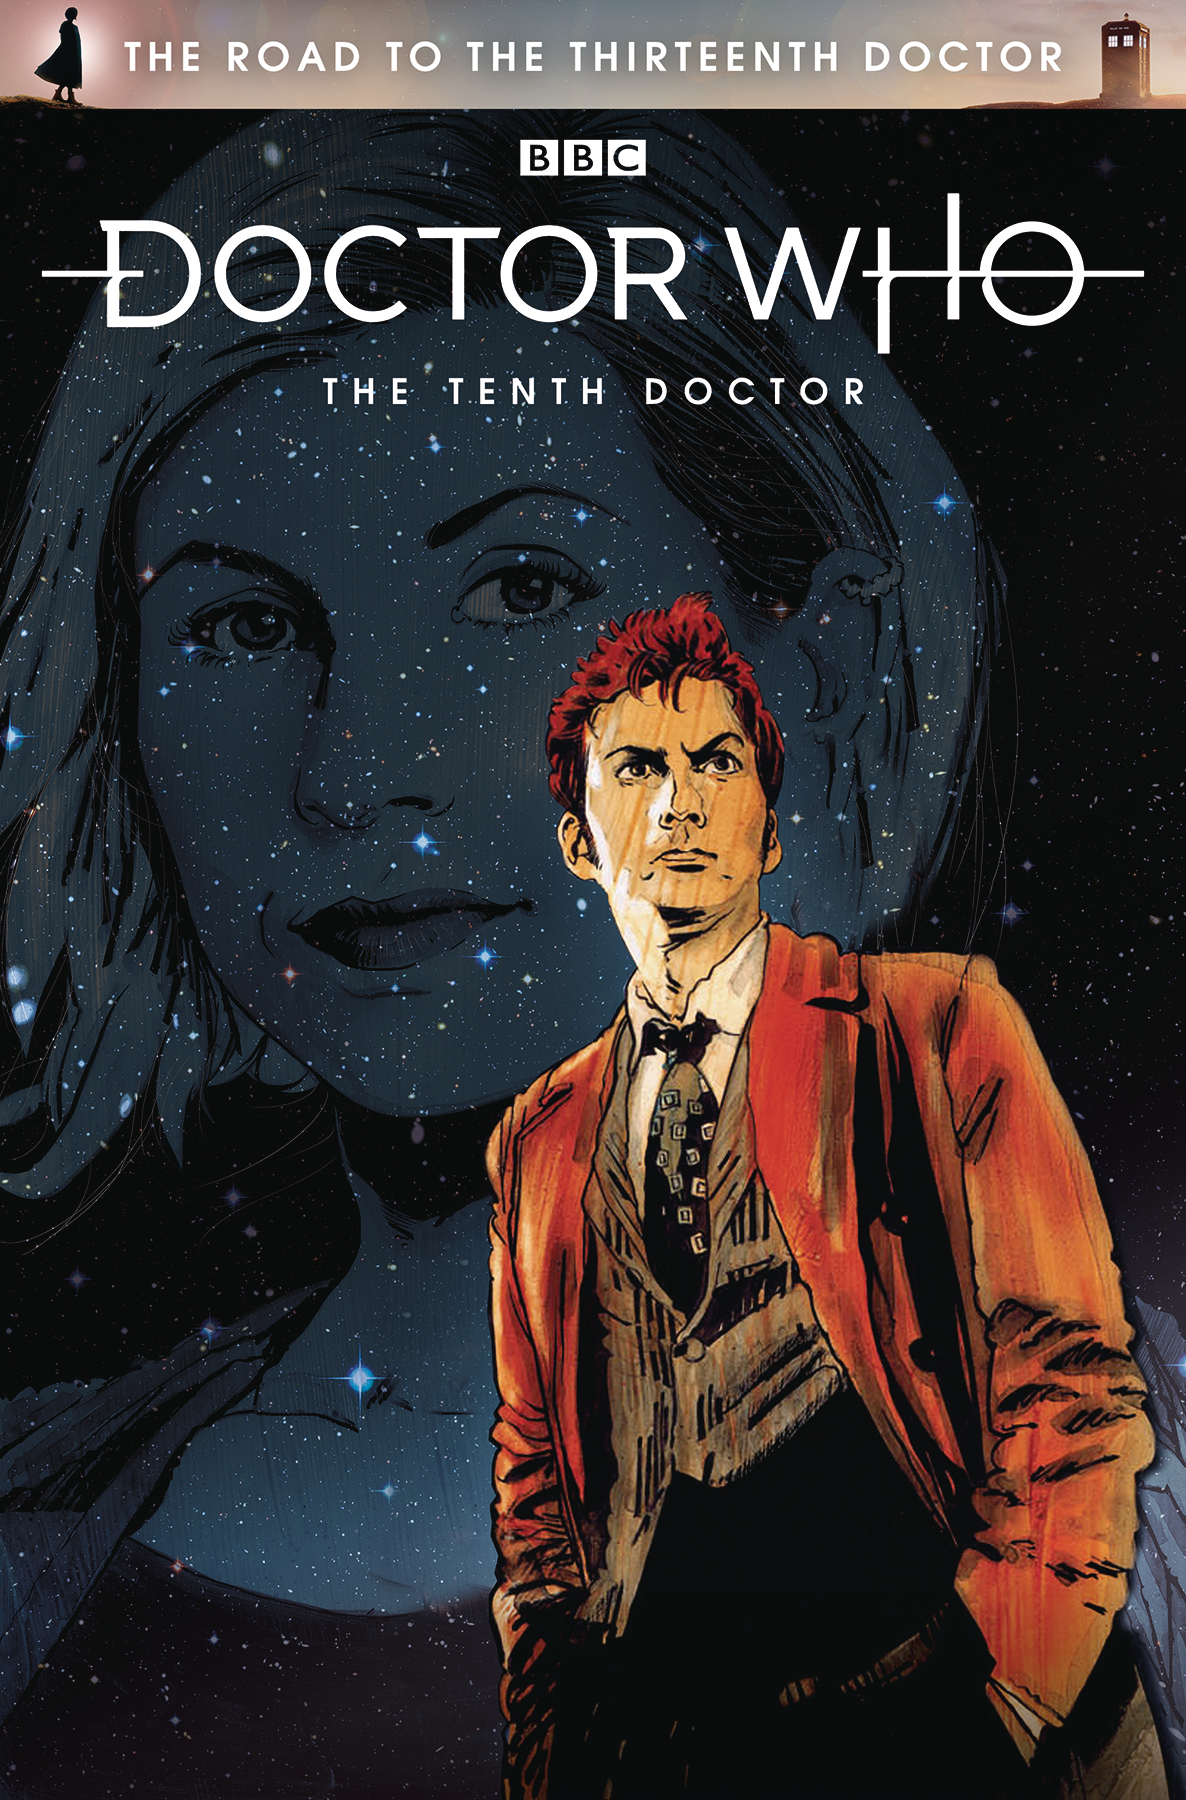 DOCTOR WHO ROAD TO 13TH DR 10TH DR SPECIAL #1 CVR A HACK